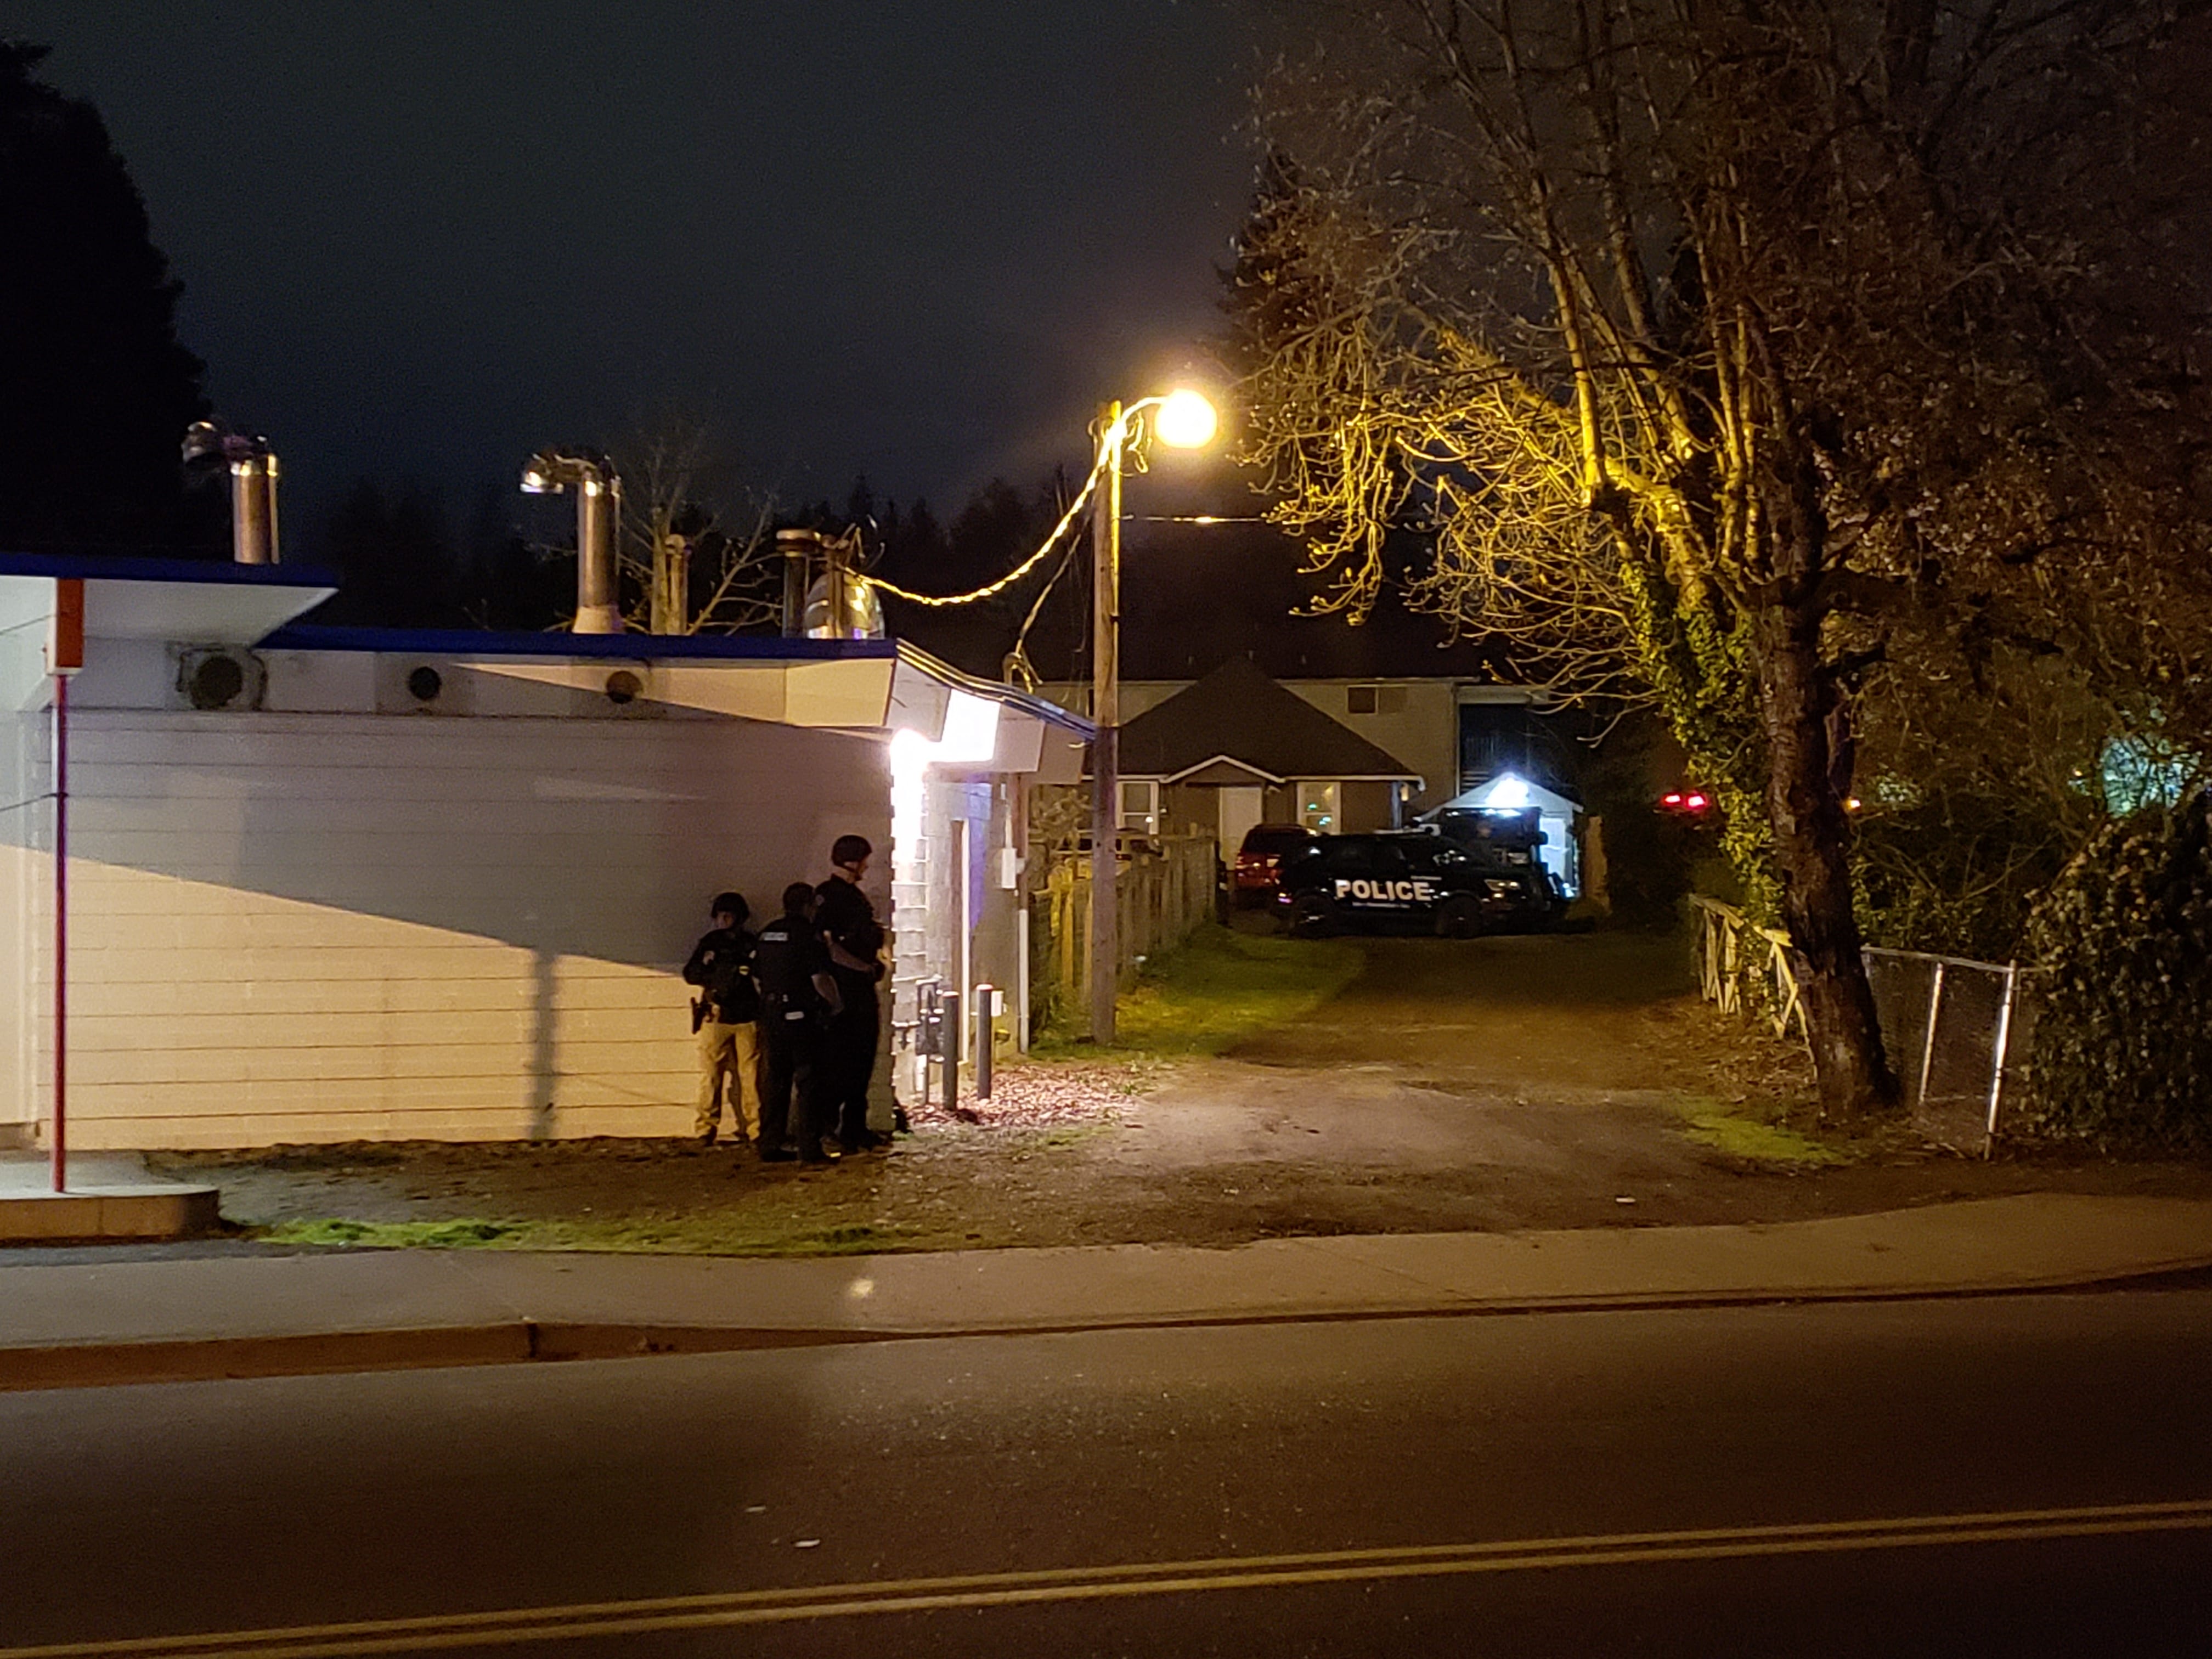 Vancouver police search the Rose Village neighborhood Wednesday night for a man wanted for multiple alleged incidents, including the discharge of a firearm and ramming a police vehicle.